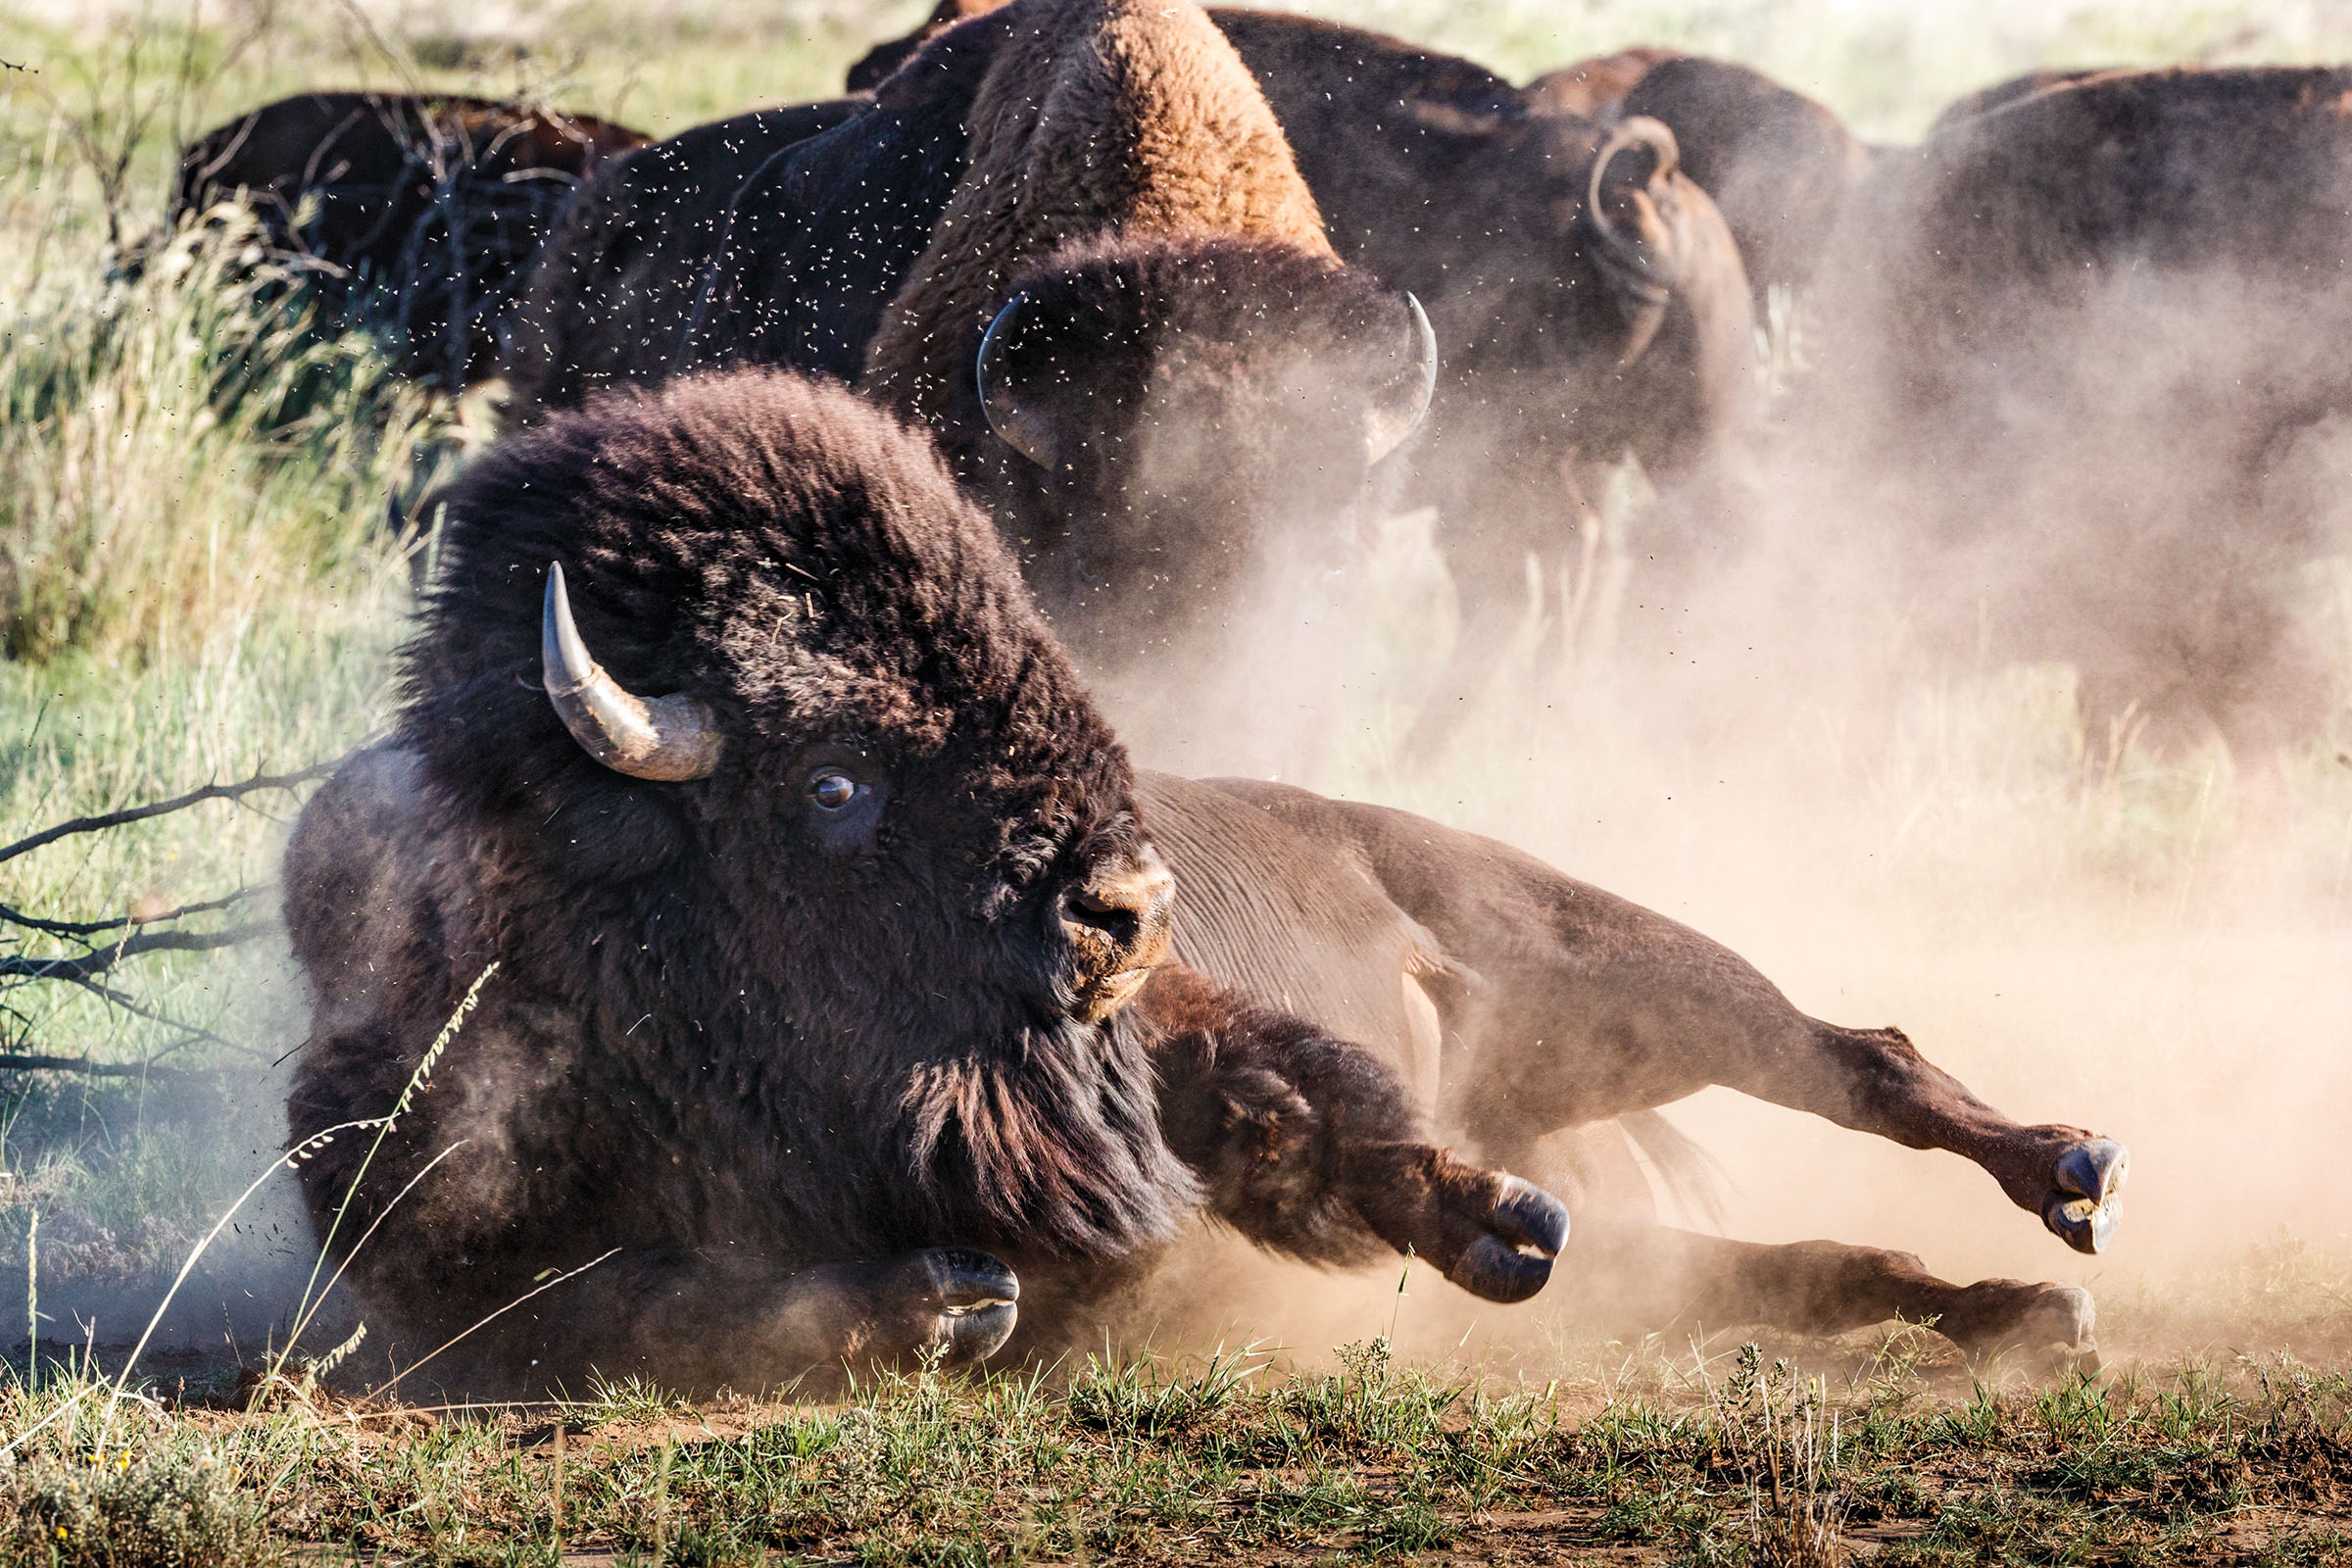 A bison rolls in the dust in front of a group of other bison